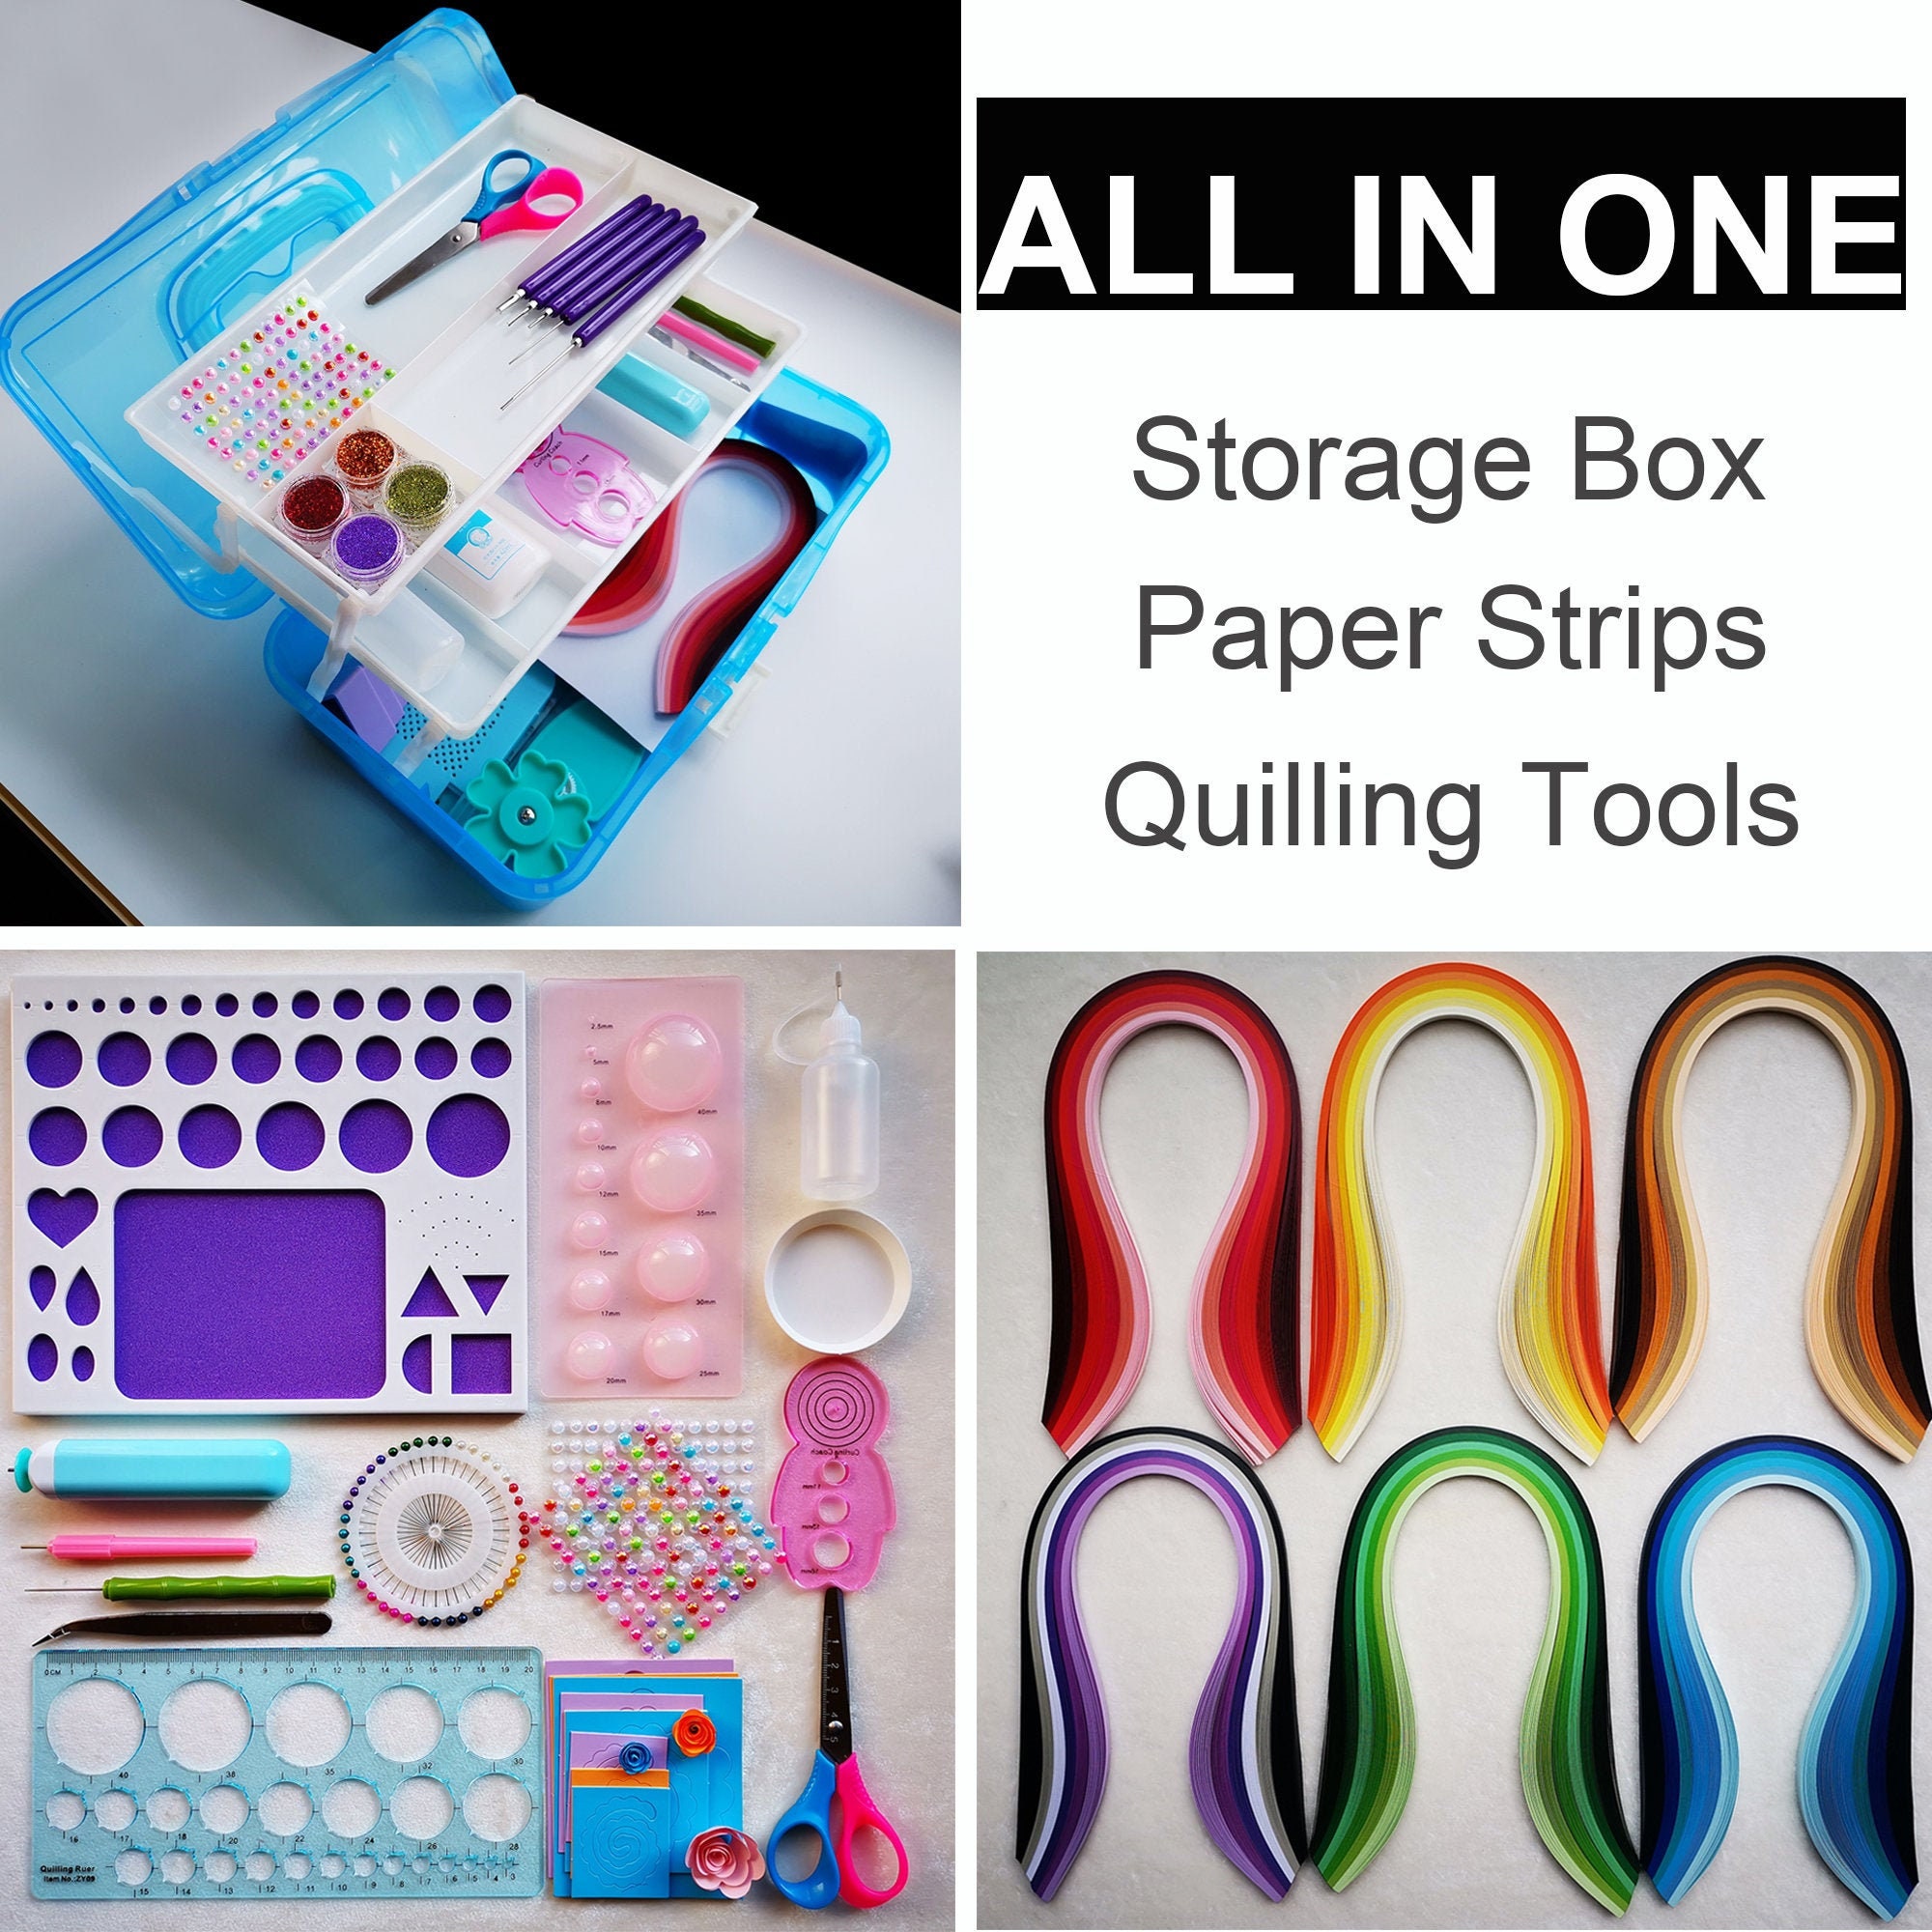 8 Pieces,Quilling Needles,Quilling Knitting Board,Quilling Kits,Paper Quilling Tools,Quilling Curling Coach,Paper Craft DIY Tools,Assorted Sizes